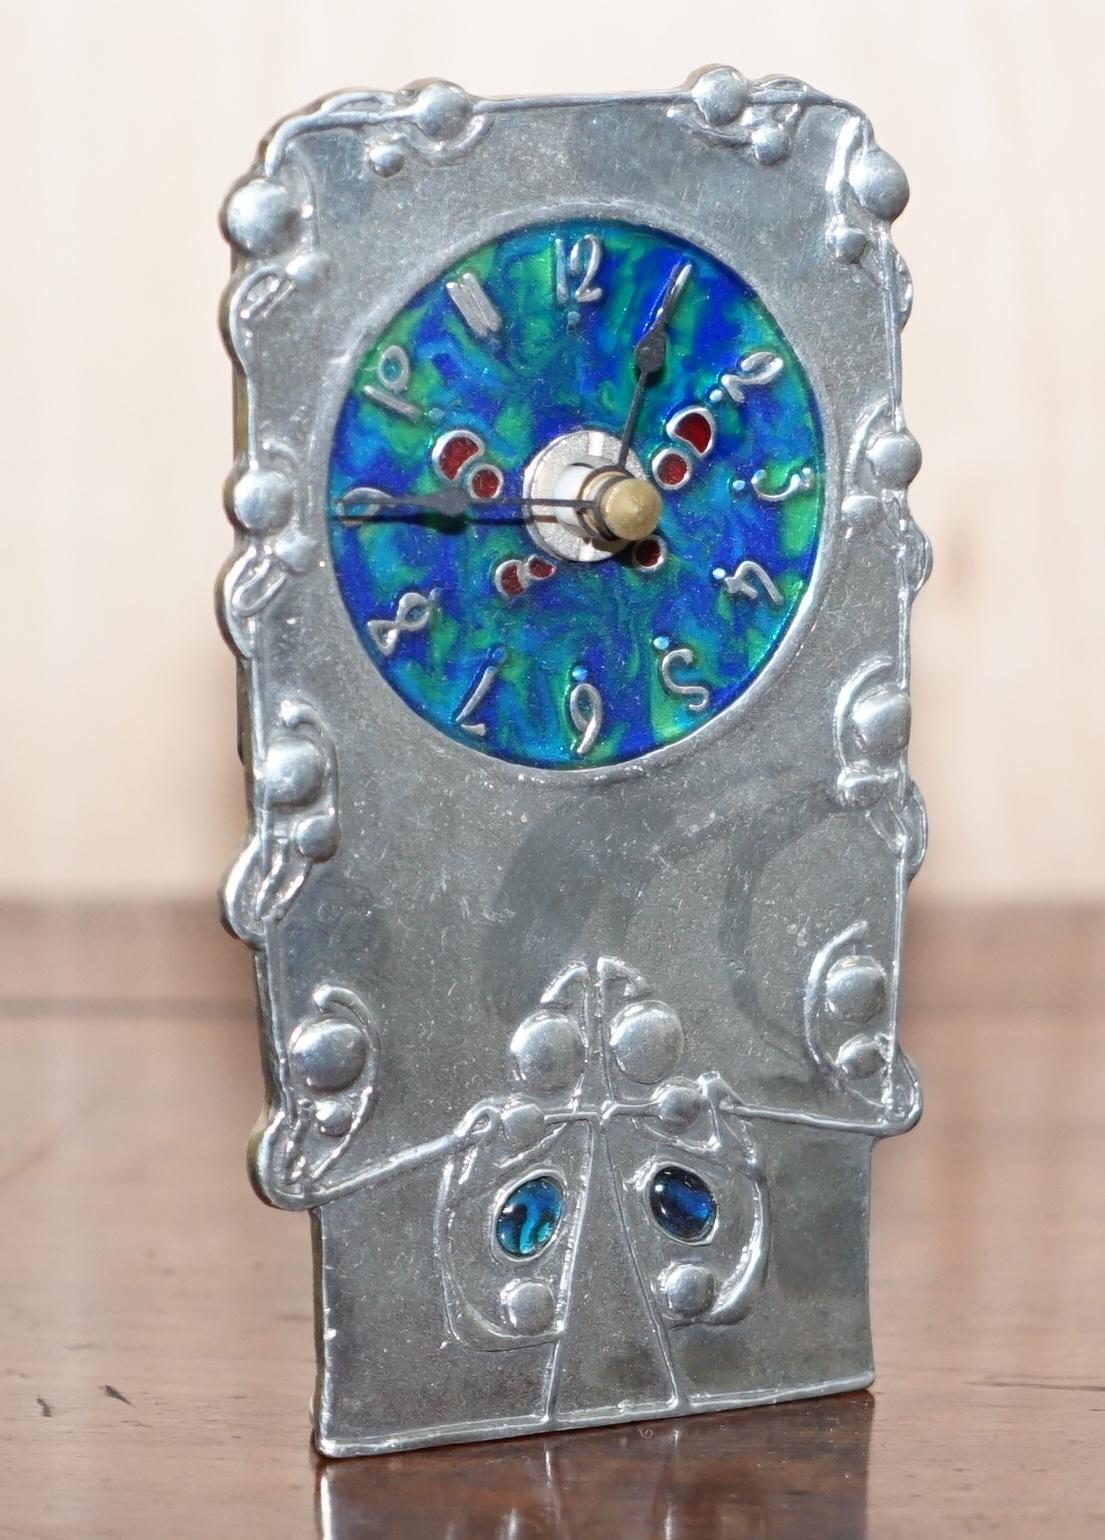 We are delighted to offer for sale this lovely 1903 Liberty London Archibald Knox Tudric Pewter enamel carriage clock

This clock is an excellent example of the very collectable carriage clocks designed by Knox for Liberty, it has the gorgeous